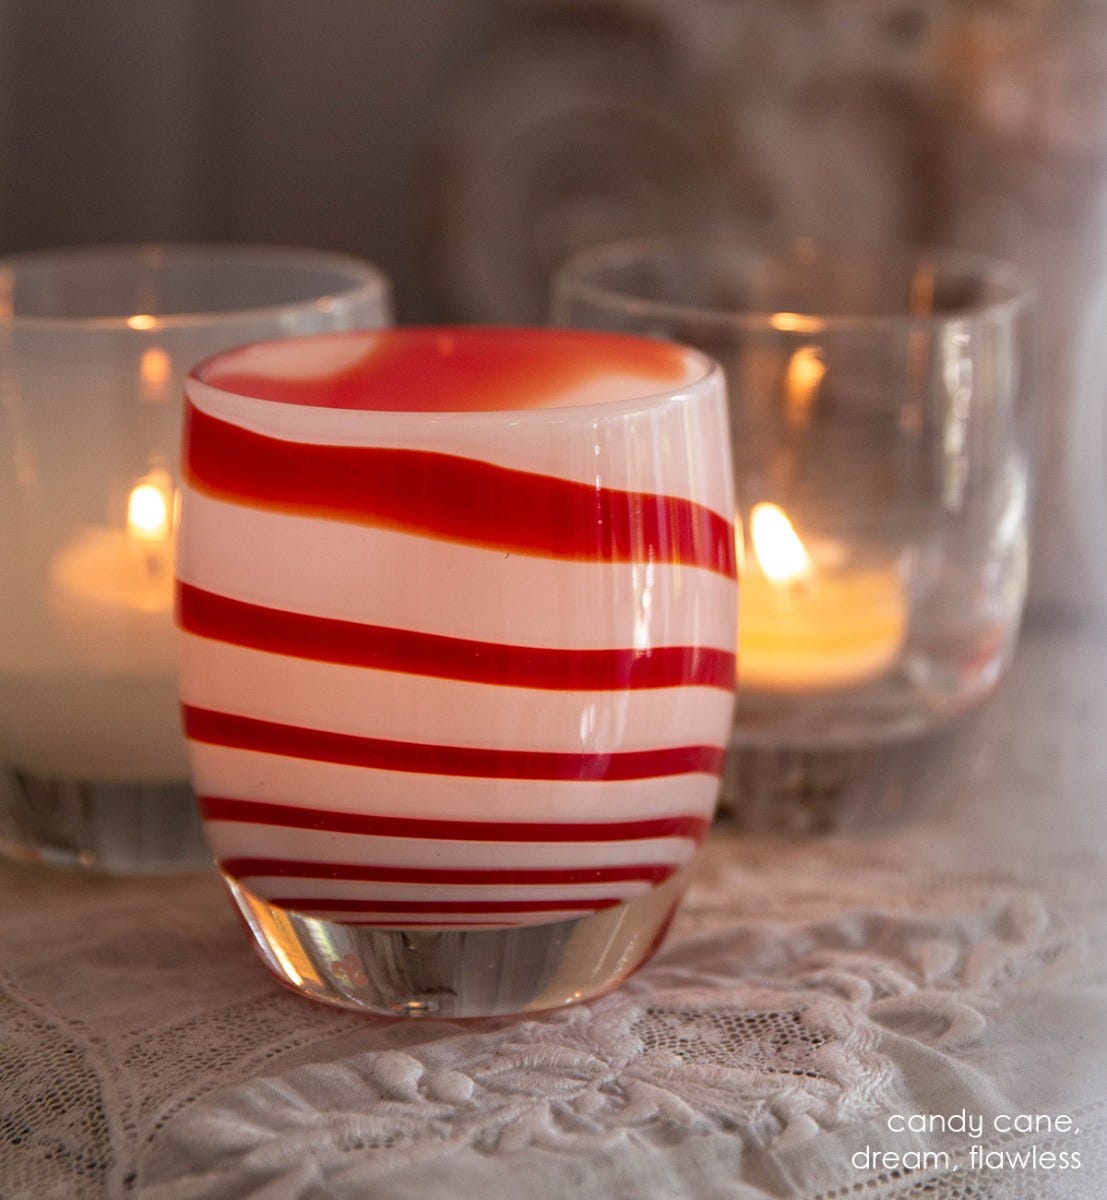 candy cane, red and white striped, hand-blown glass votive candle holder. Paired with dream and flawless.